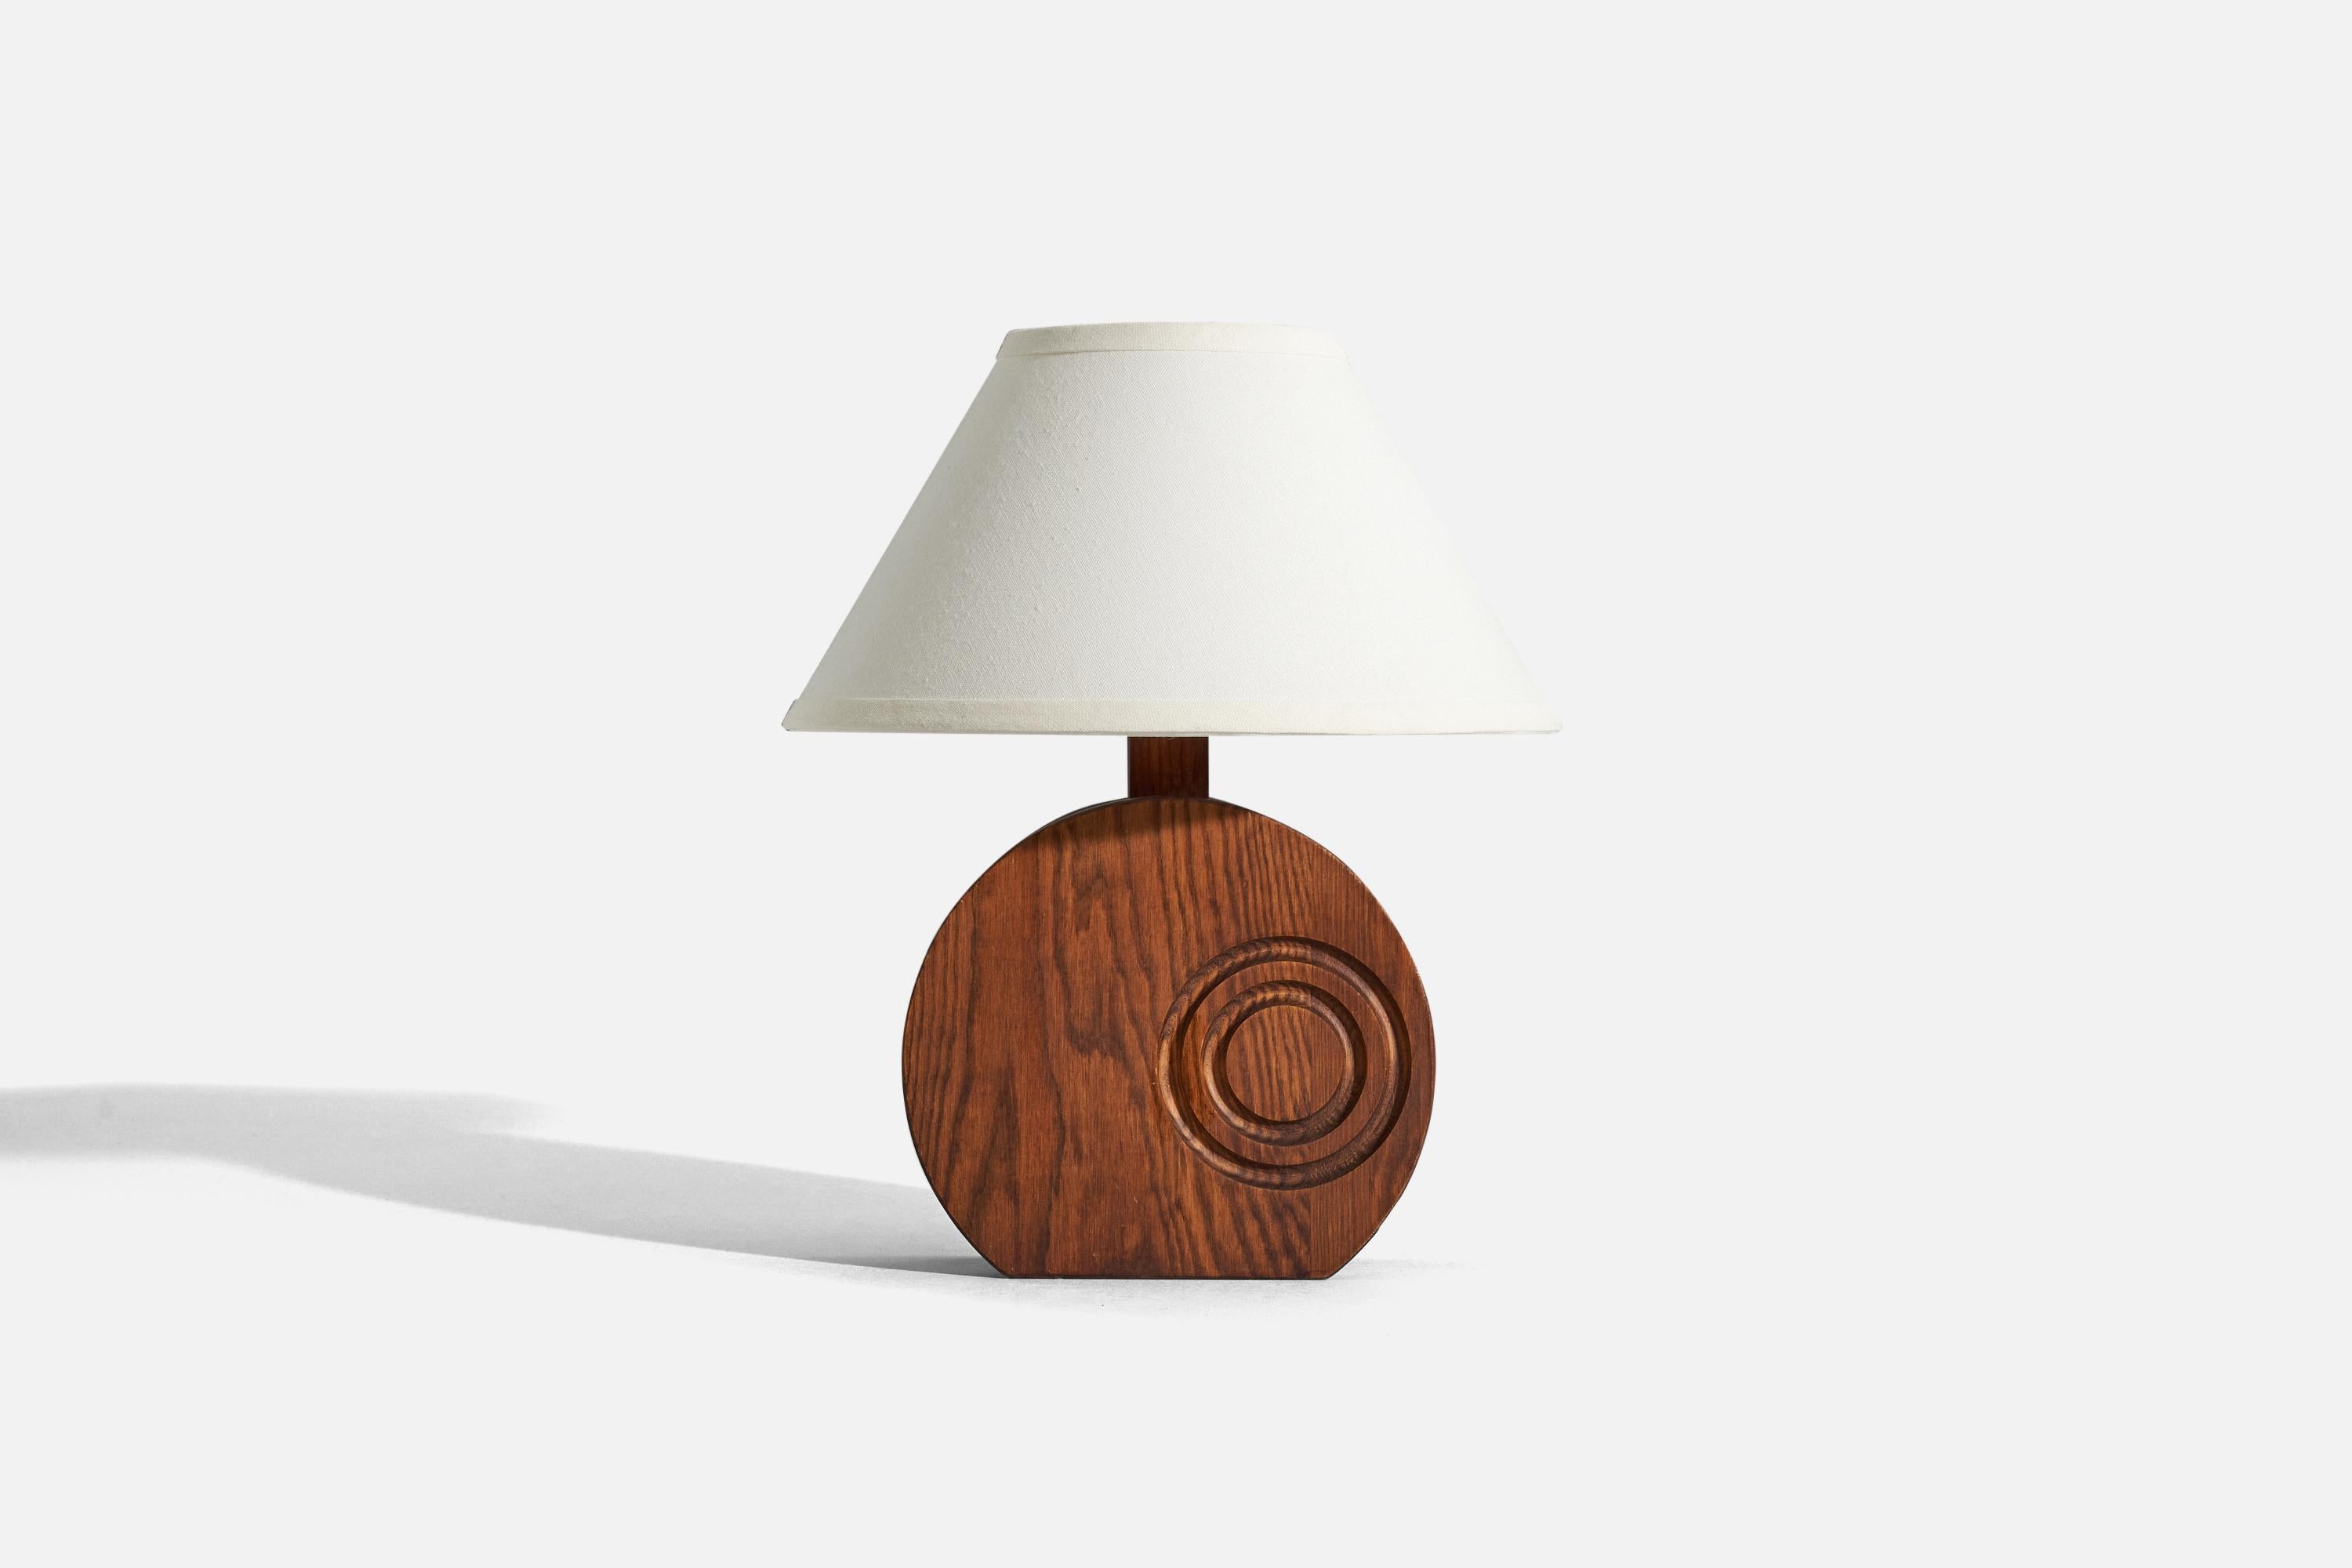 A pine table lamp designed and produced by a Swedish designer, Sweden, c. 1970s.

Sold without lampshade. 
Dimensions of Lamp (inches) : 11.875 x 8.25 x 2.75 (H x W x D)
Dimensions of Shade (inches) : 5.25 x 12.25 x 7.25 (T x B x H)
Dimension of